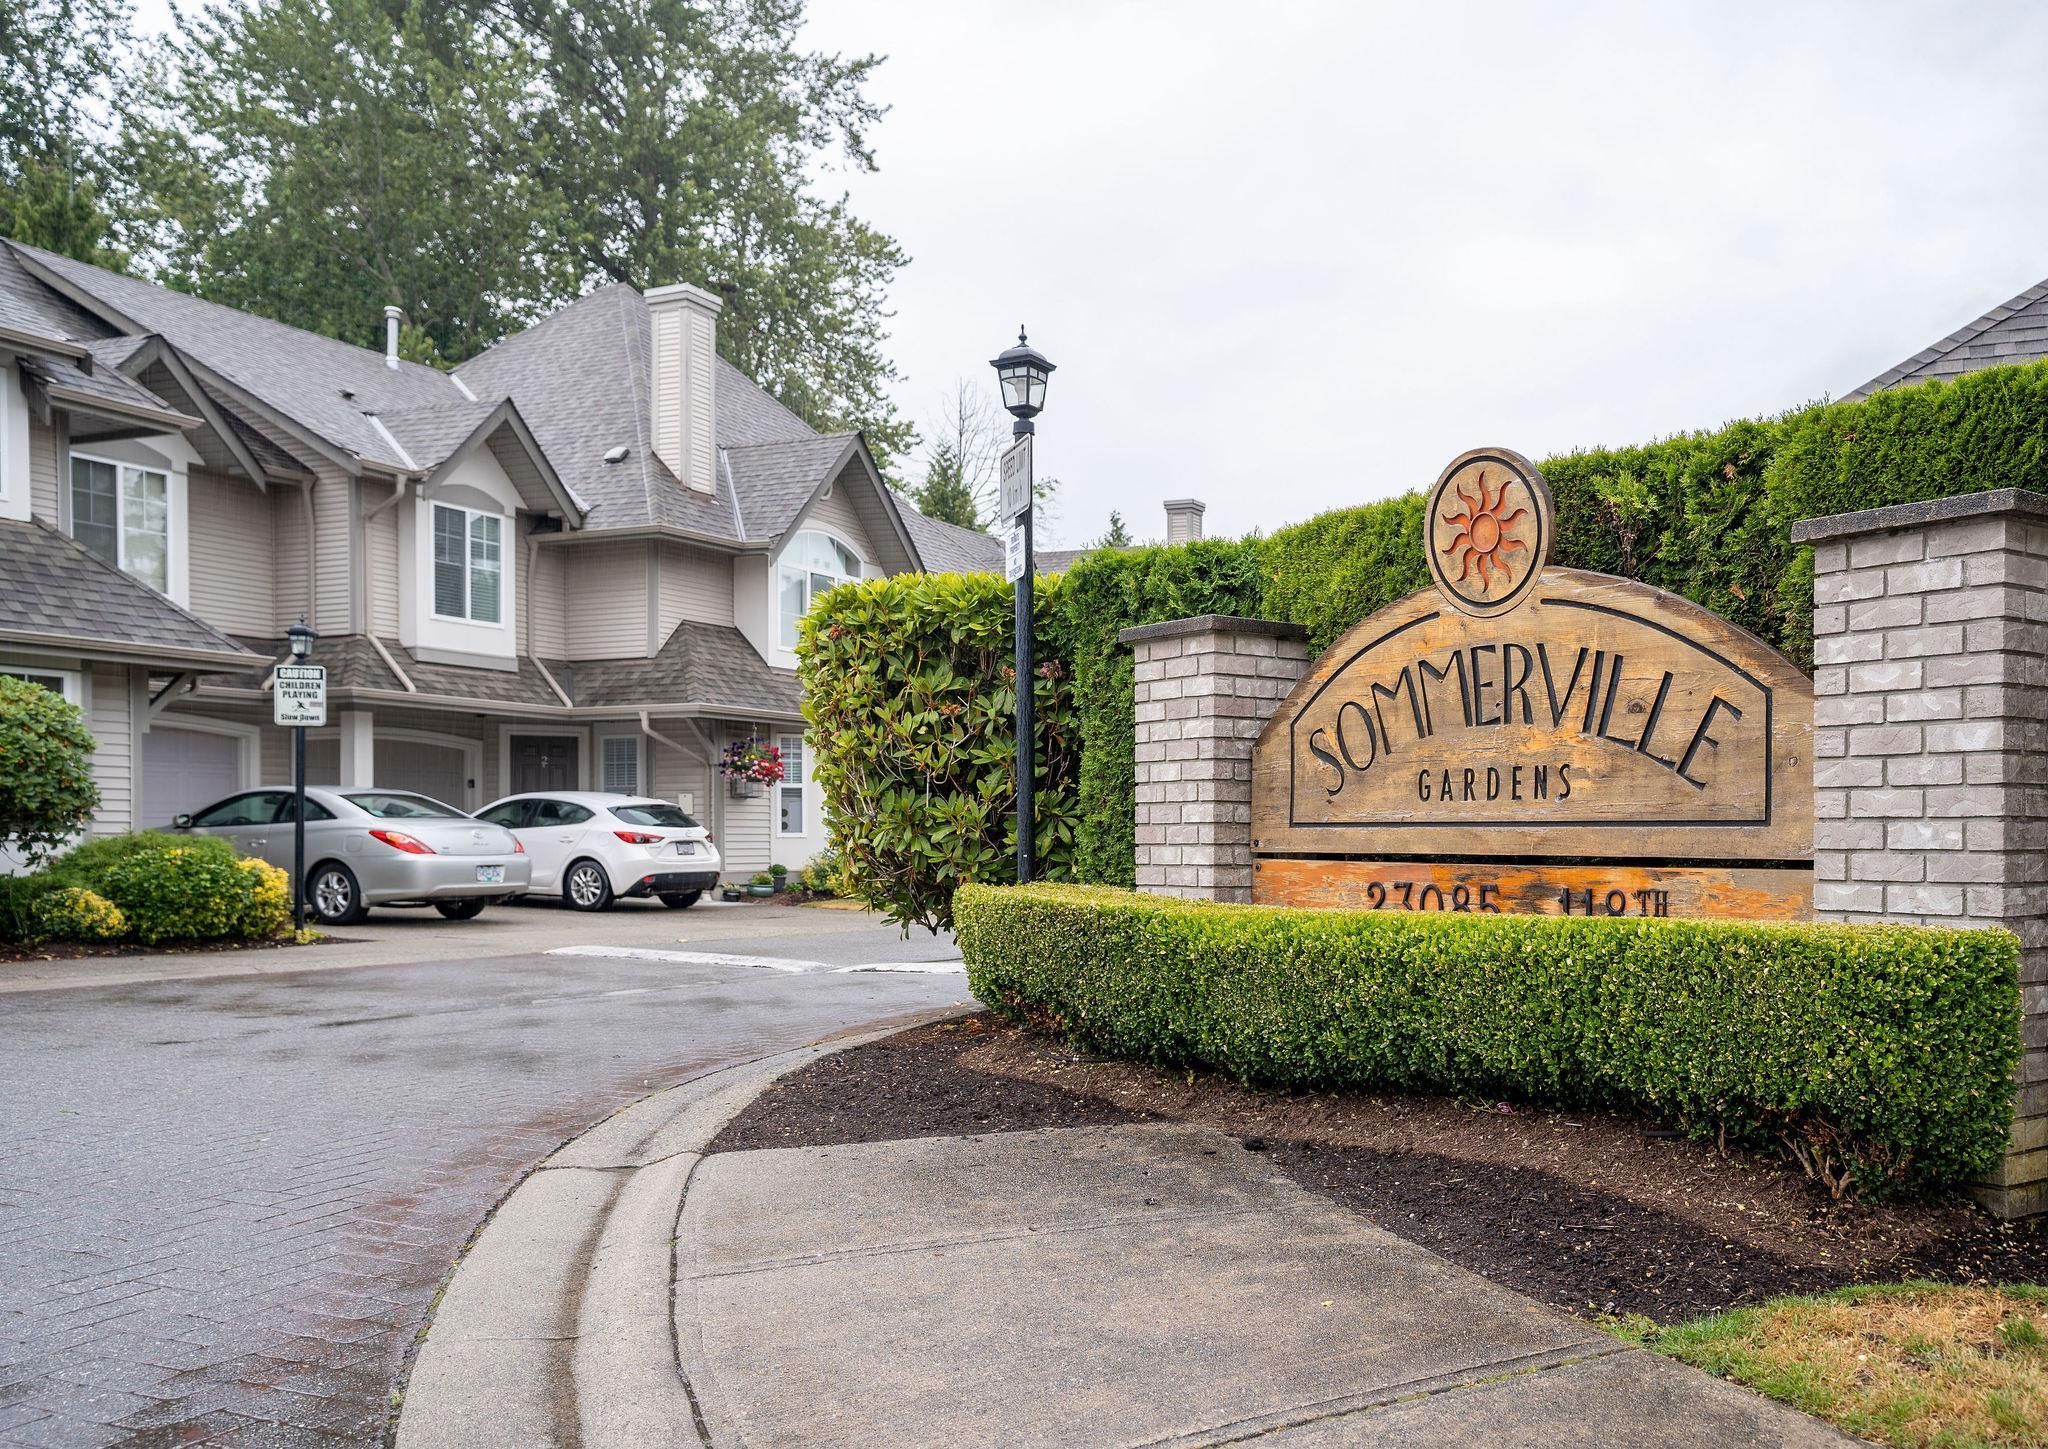 Open House on Saturday, June 24, 2023 11:00AM - 1:00PM
This is the buy that Buyers dream of finding.  Great townhome just awaiting a Buyers personal decor touches.  If you're a serious qualified Buyer, THIS IS A VERY DEFINITE MUST SEE!   Come &amp; see fo